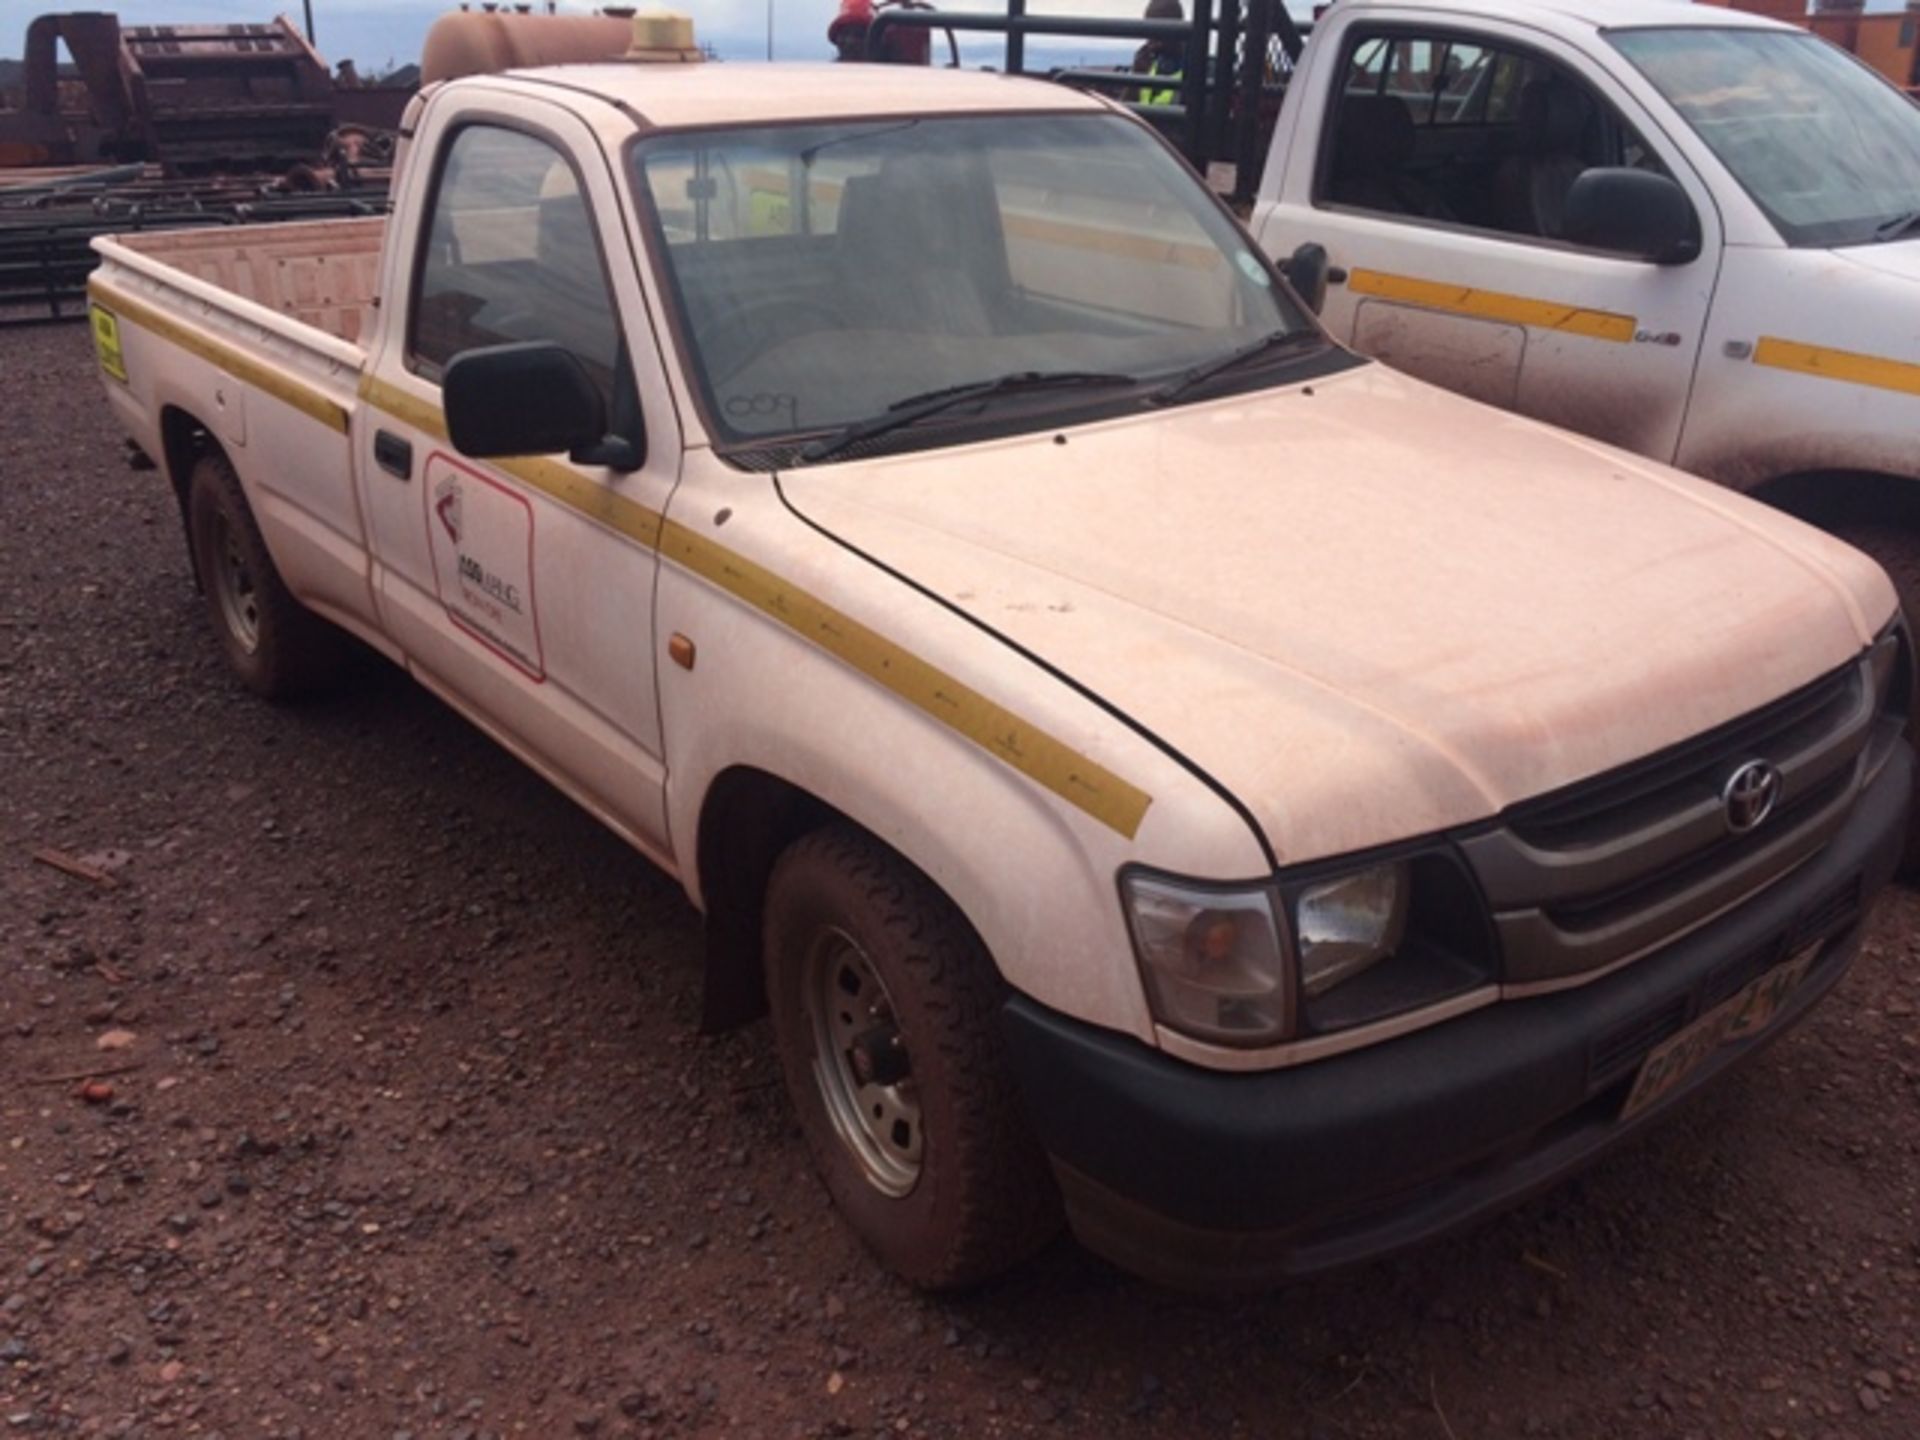 2003TOYOTA HILUX 2400DLWB 64986KM-DEREG.NO DOC FEE
(BEESHOEK)STICKERS TO BE REMOVED BEFORE DISPATCH